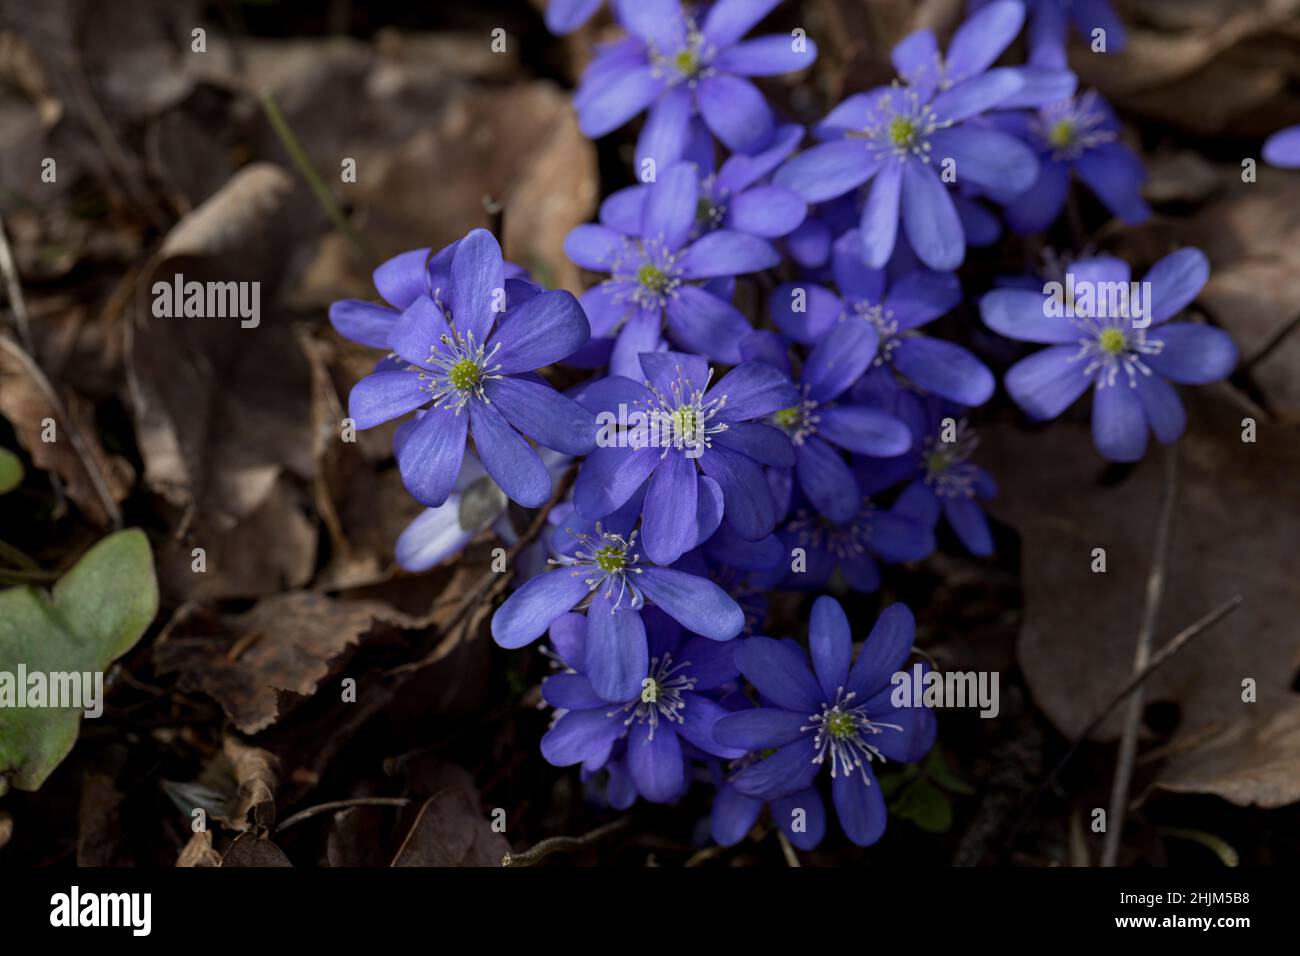 Anemone hepatica (Hepatica nobilis) Liverwort flowering in spring in the forest. Wild forest plant. Close up. Stock Photo